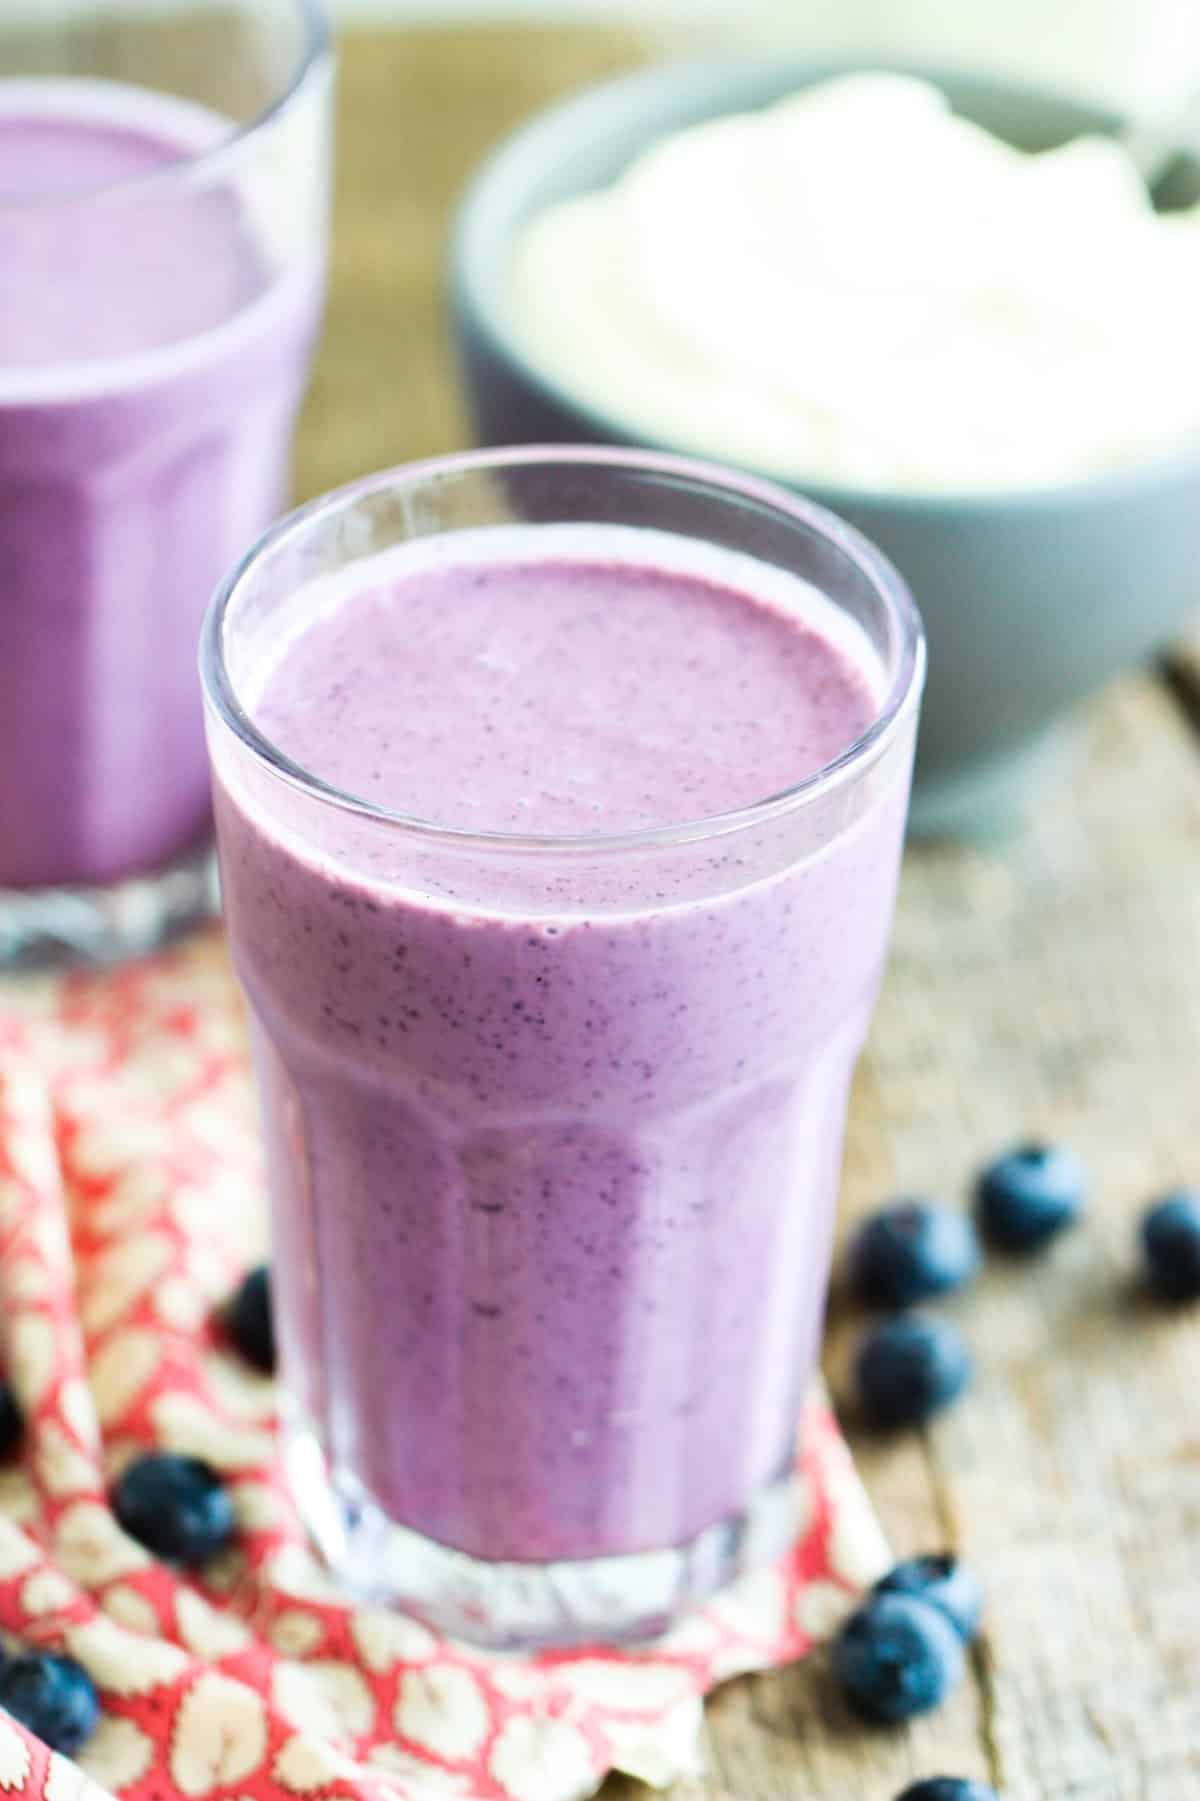  Satisfy your sweet tooth with this delicious Booberry Yogo Smoothie.